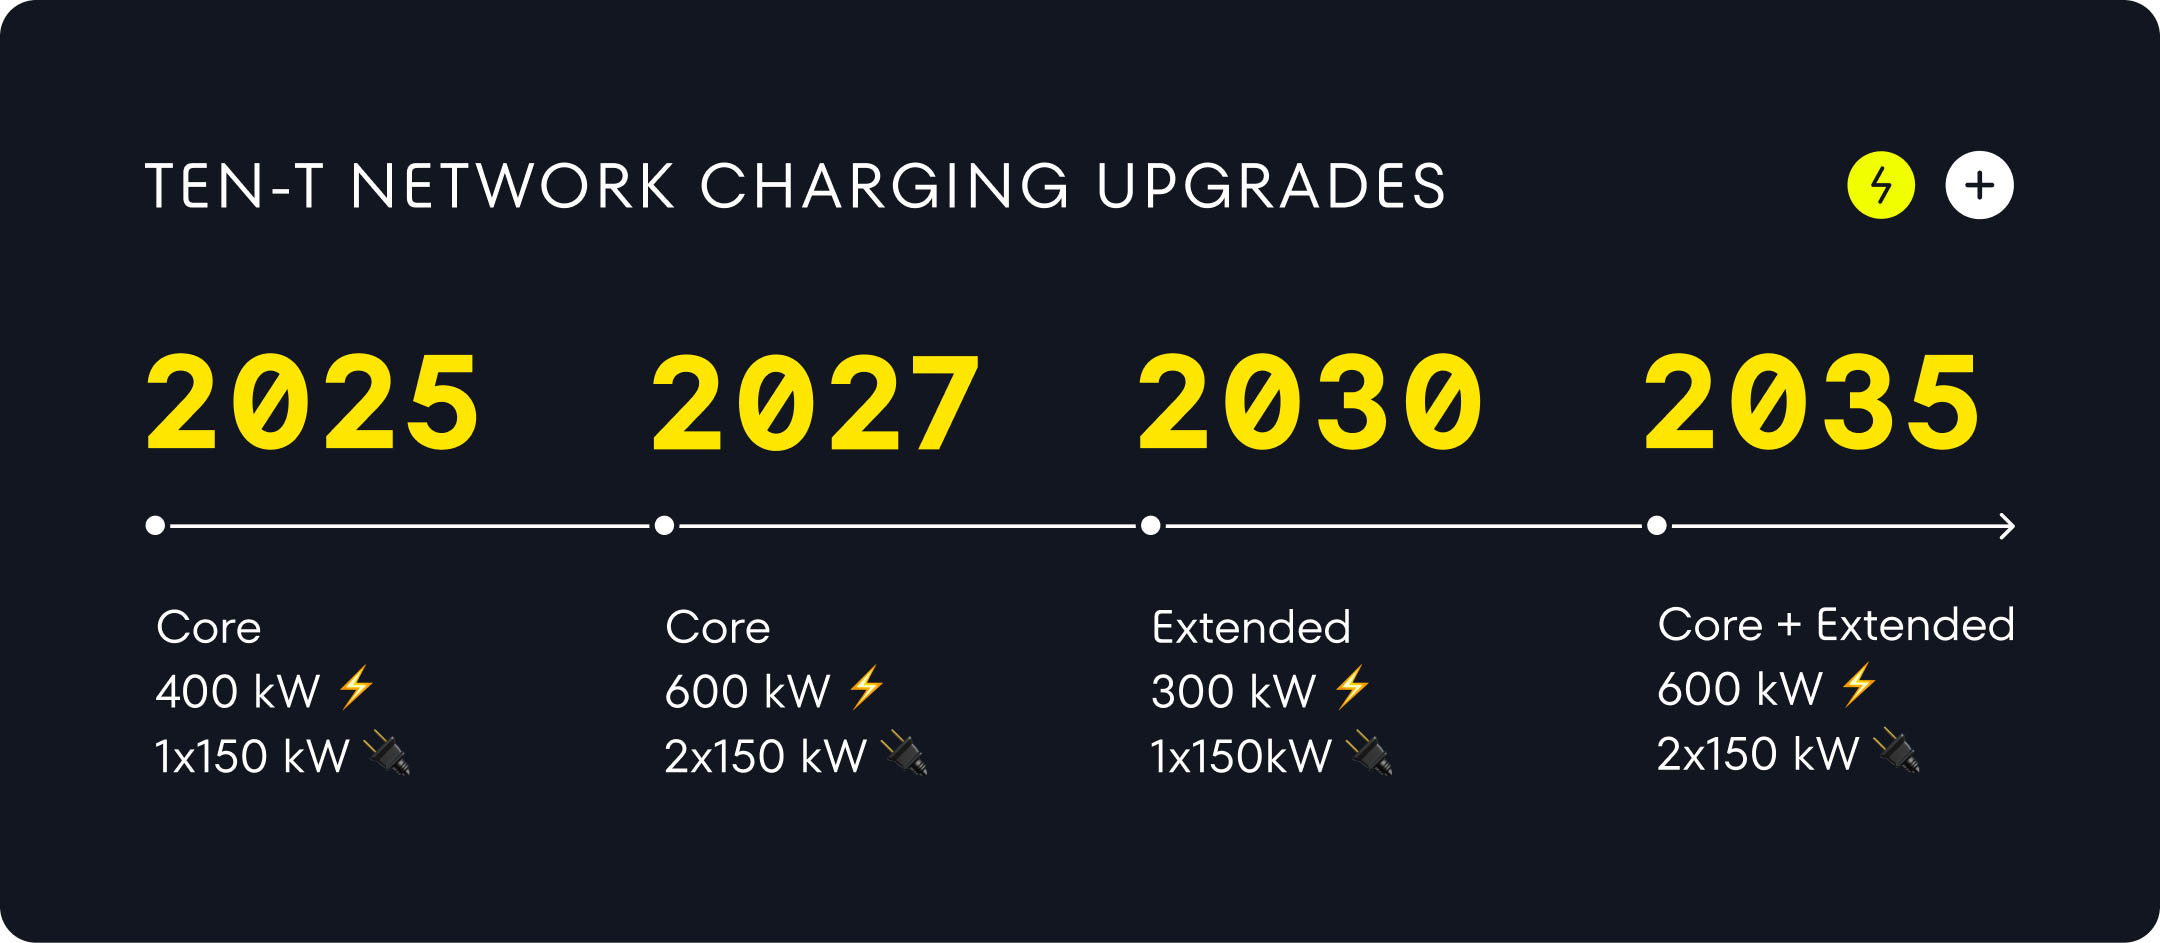 Between 2025 and 2035, the entire TEN-T highway network will be electrified. This will happen in stages.